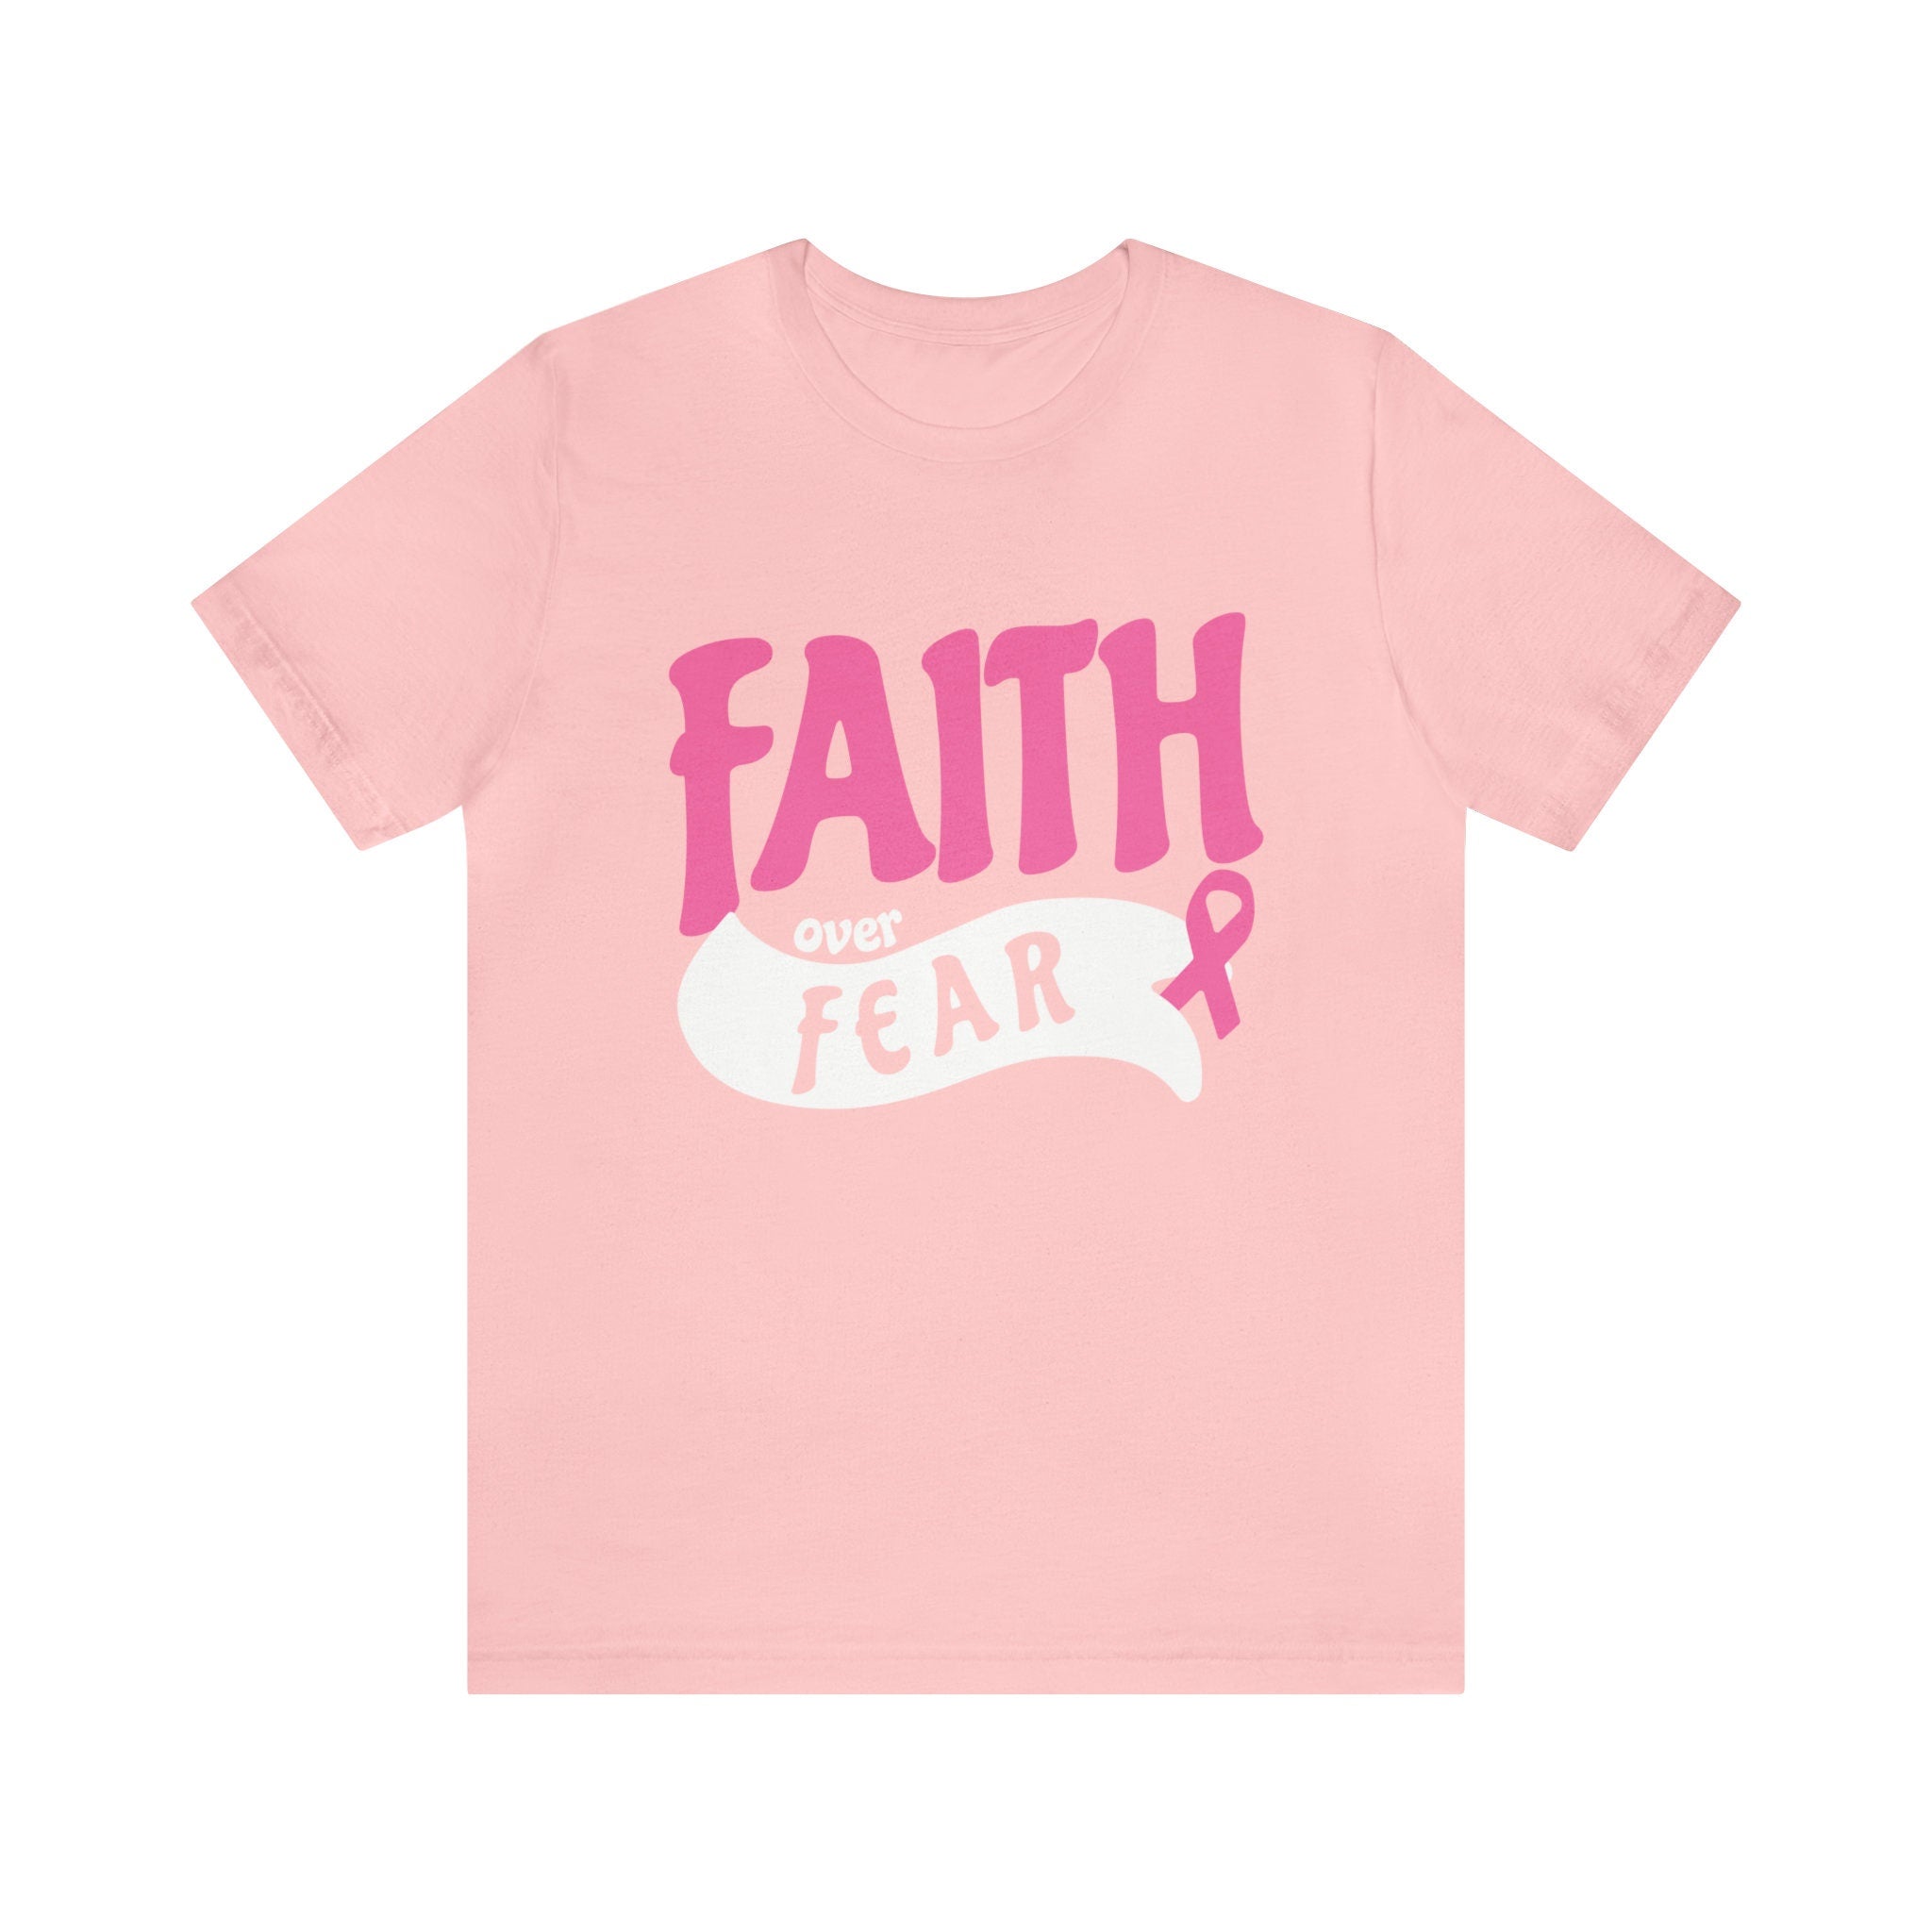 Pink Breast Cancer Shirt Women, Breast Cancer Party Decorations, Faith Over Fear Shirt, Pink Ribbon Awareness Breast Cancer Survivor Gift